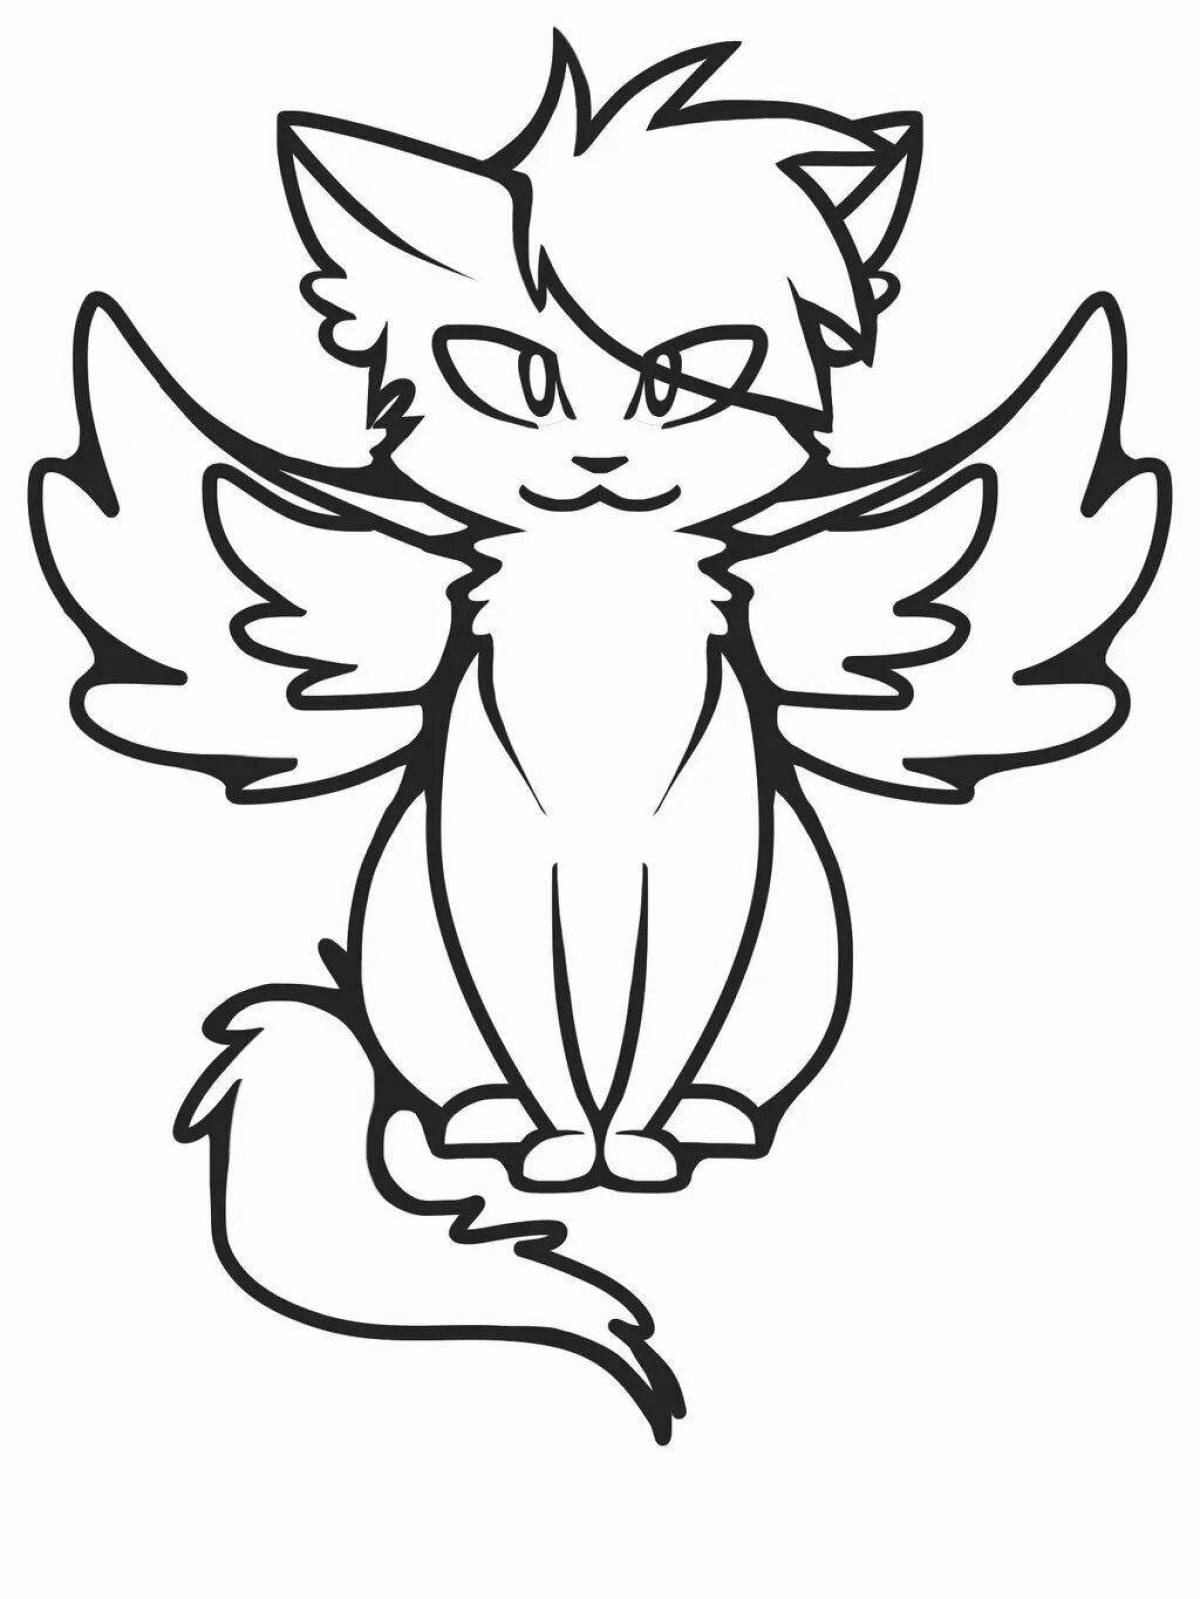 Coloring book fluffy flying cat